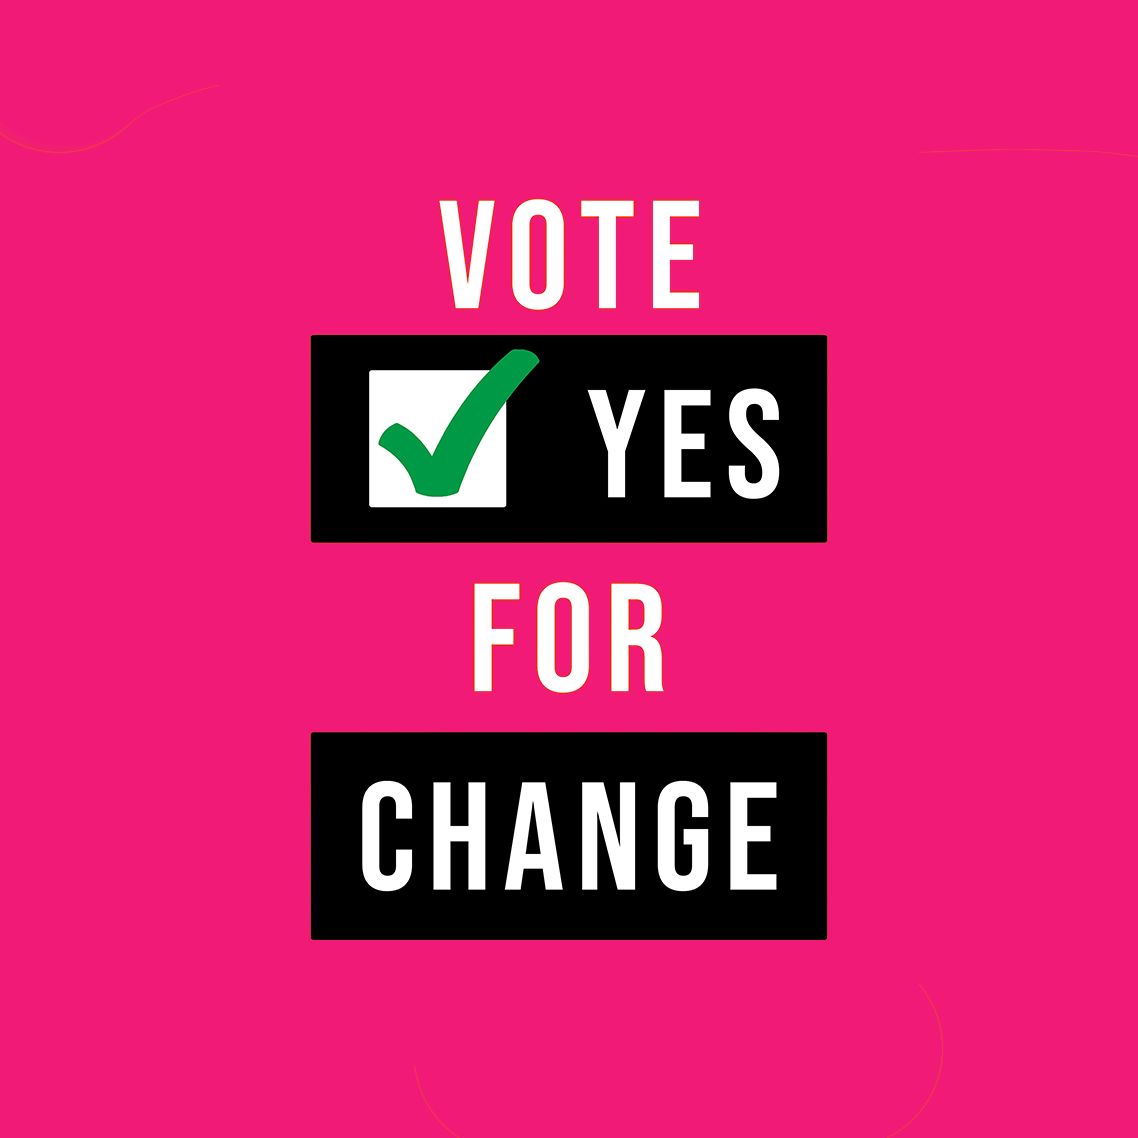 ⏰ Last few hours left! Vote YES for Chatham's first Neighbourhood Plan by local residents. 🗳️ Visit your polling station by 10pm with photo ID. ✅ Every vote matters - here's four reasons to vote YES: archesnp.org.uk/vote-yes/